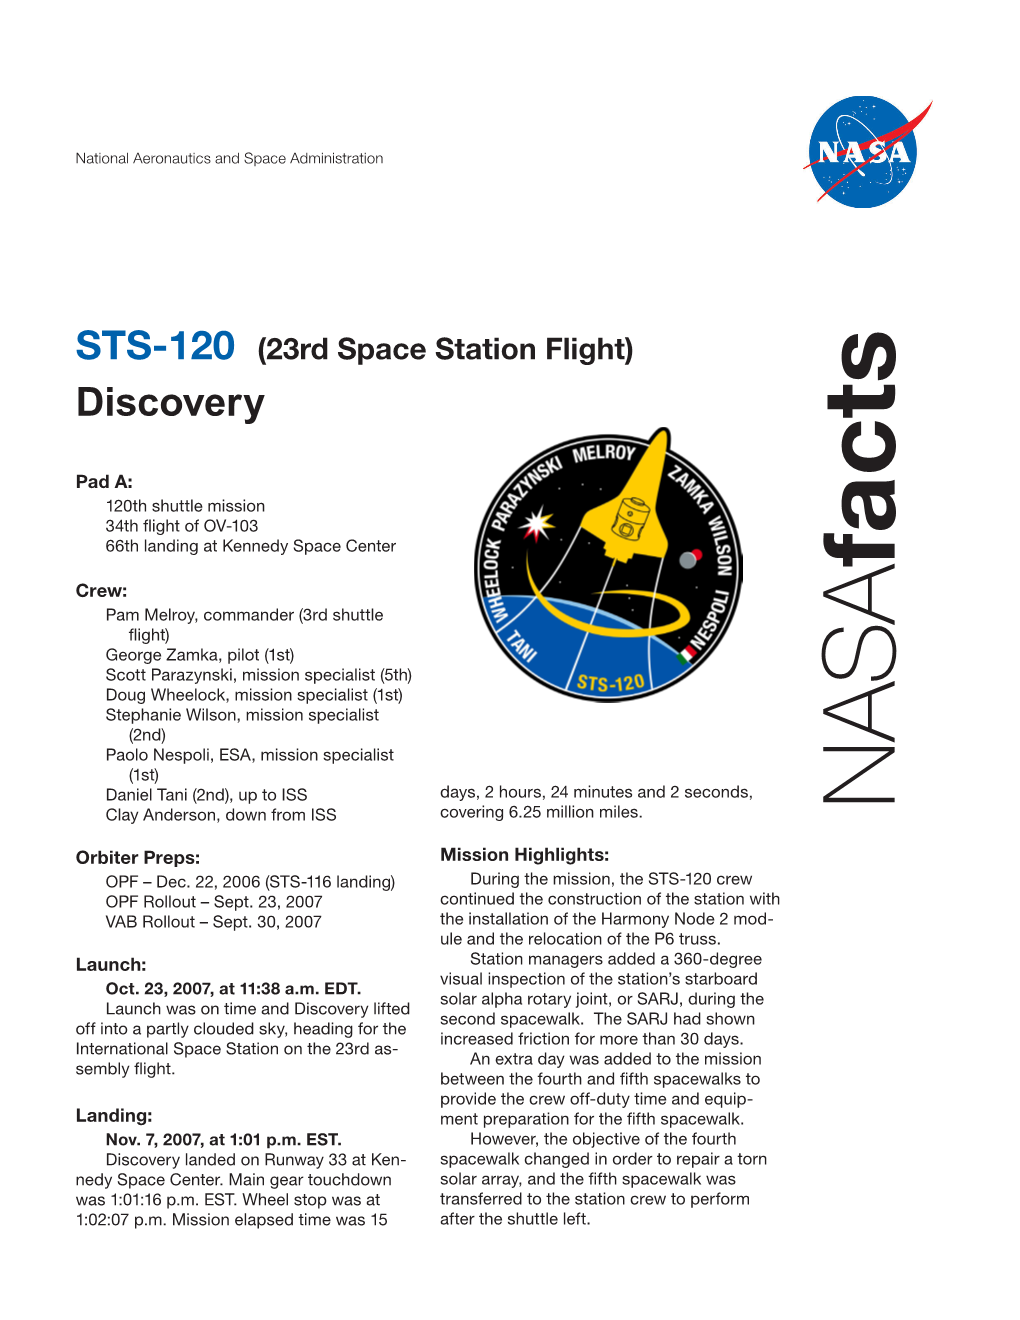 STS-120 (23Rd Space Station Flight) Discovery